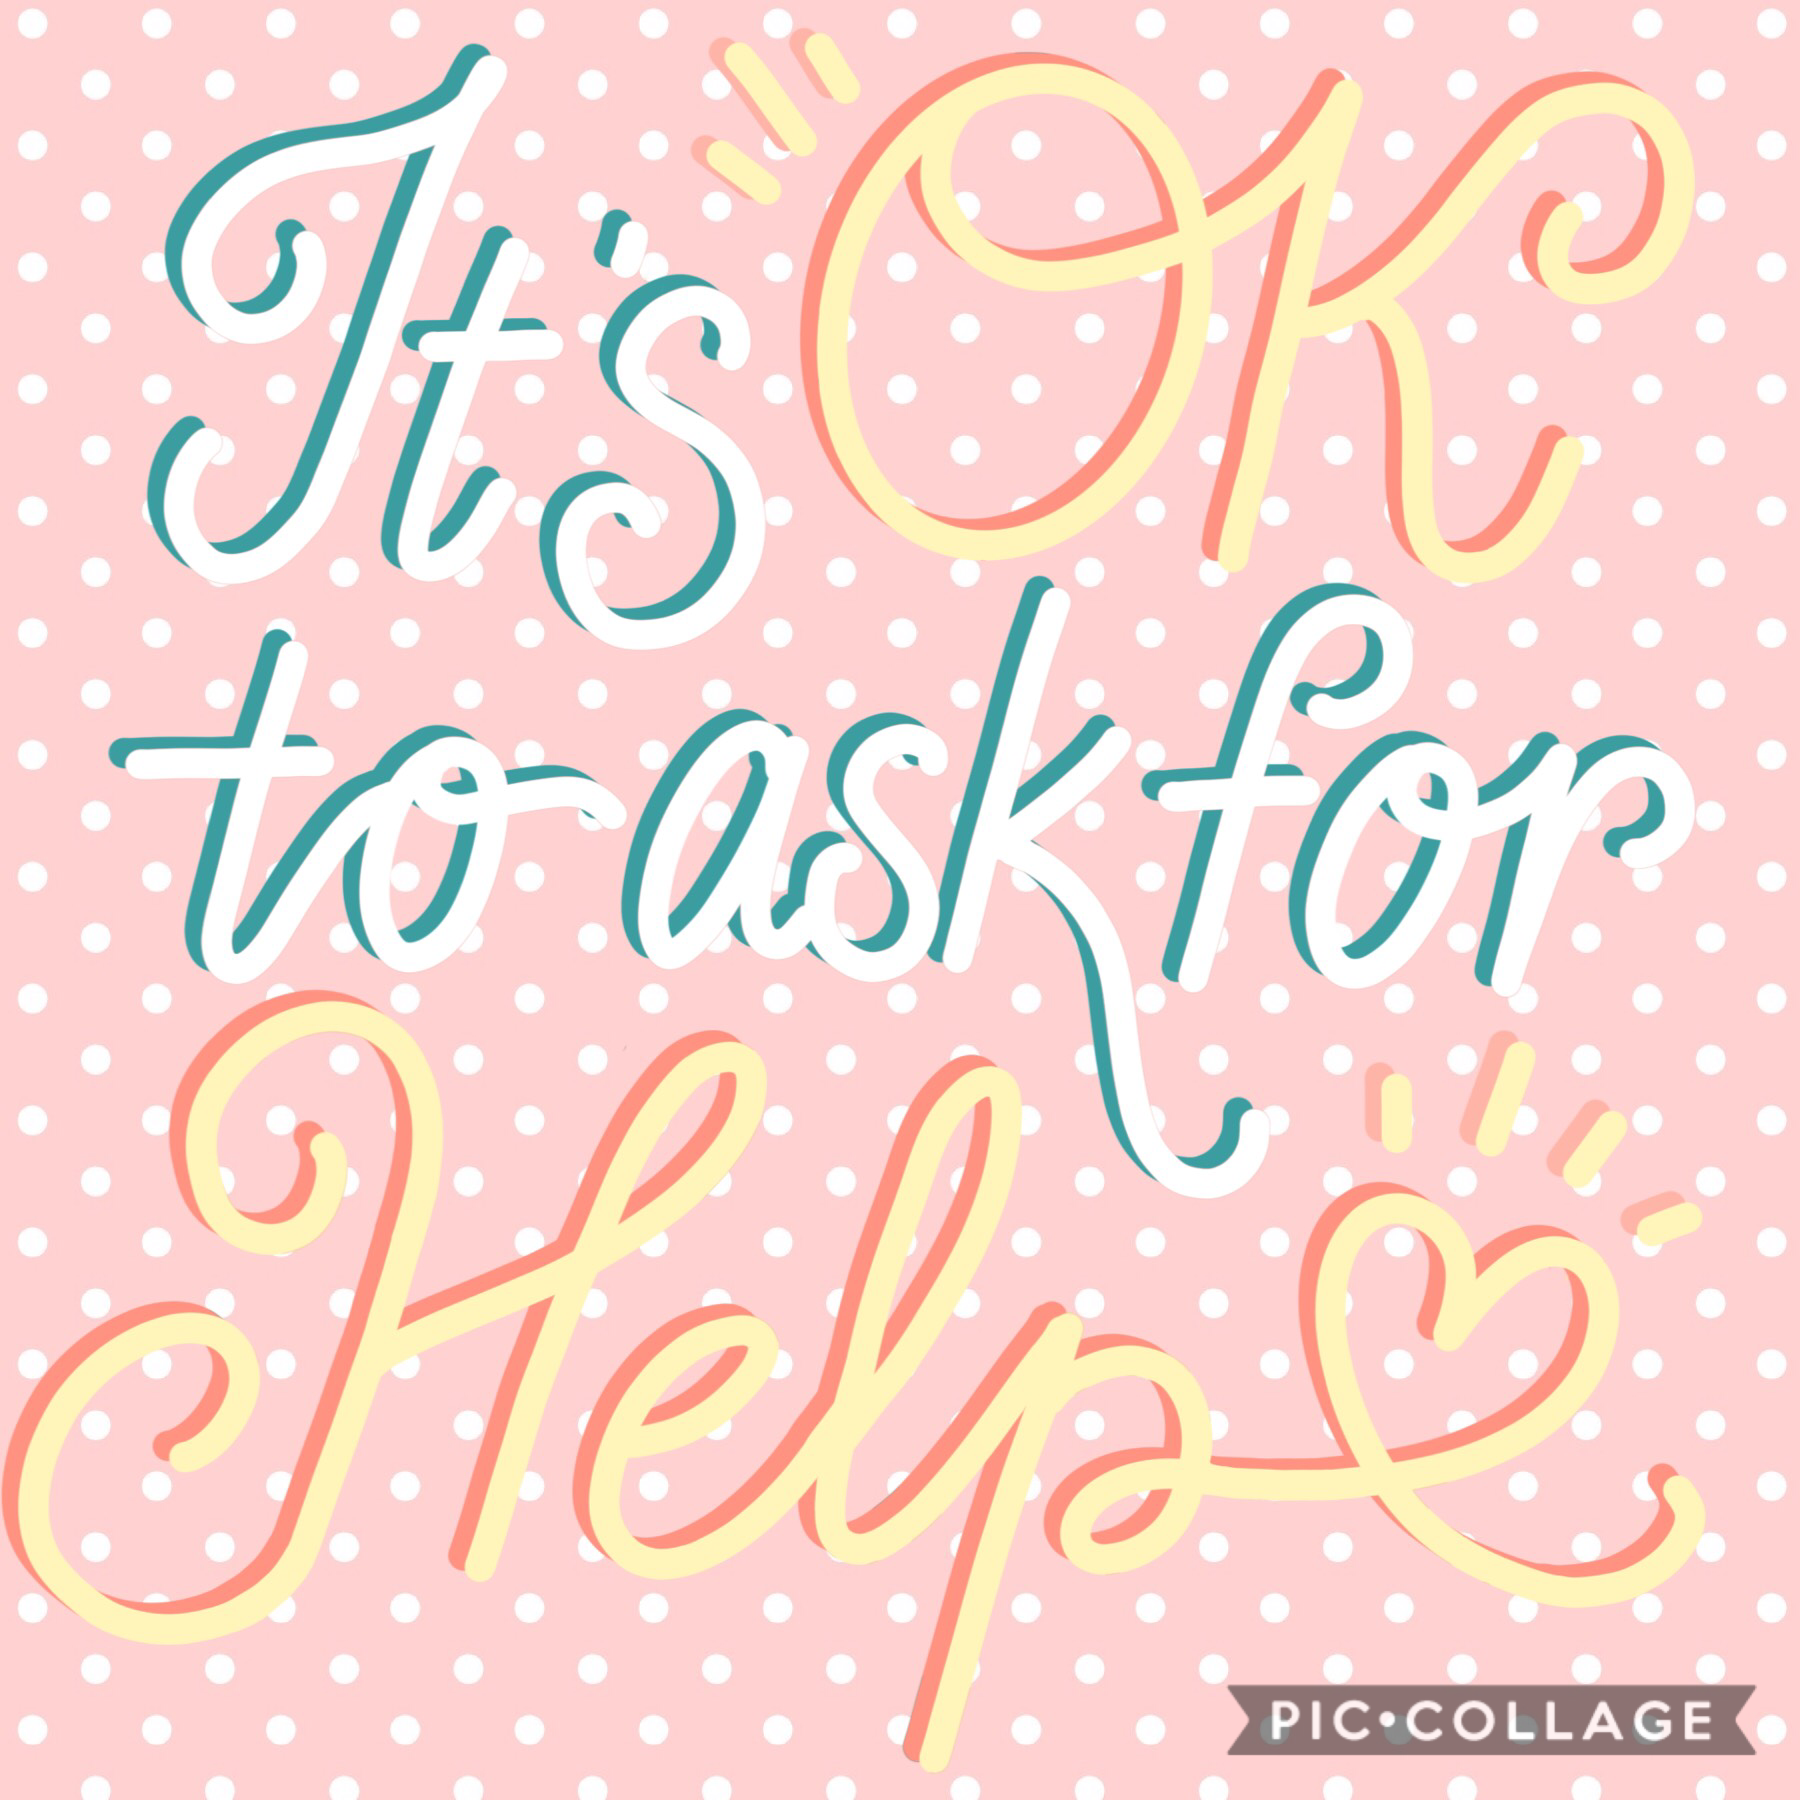 It’s ok to ask for help be youu